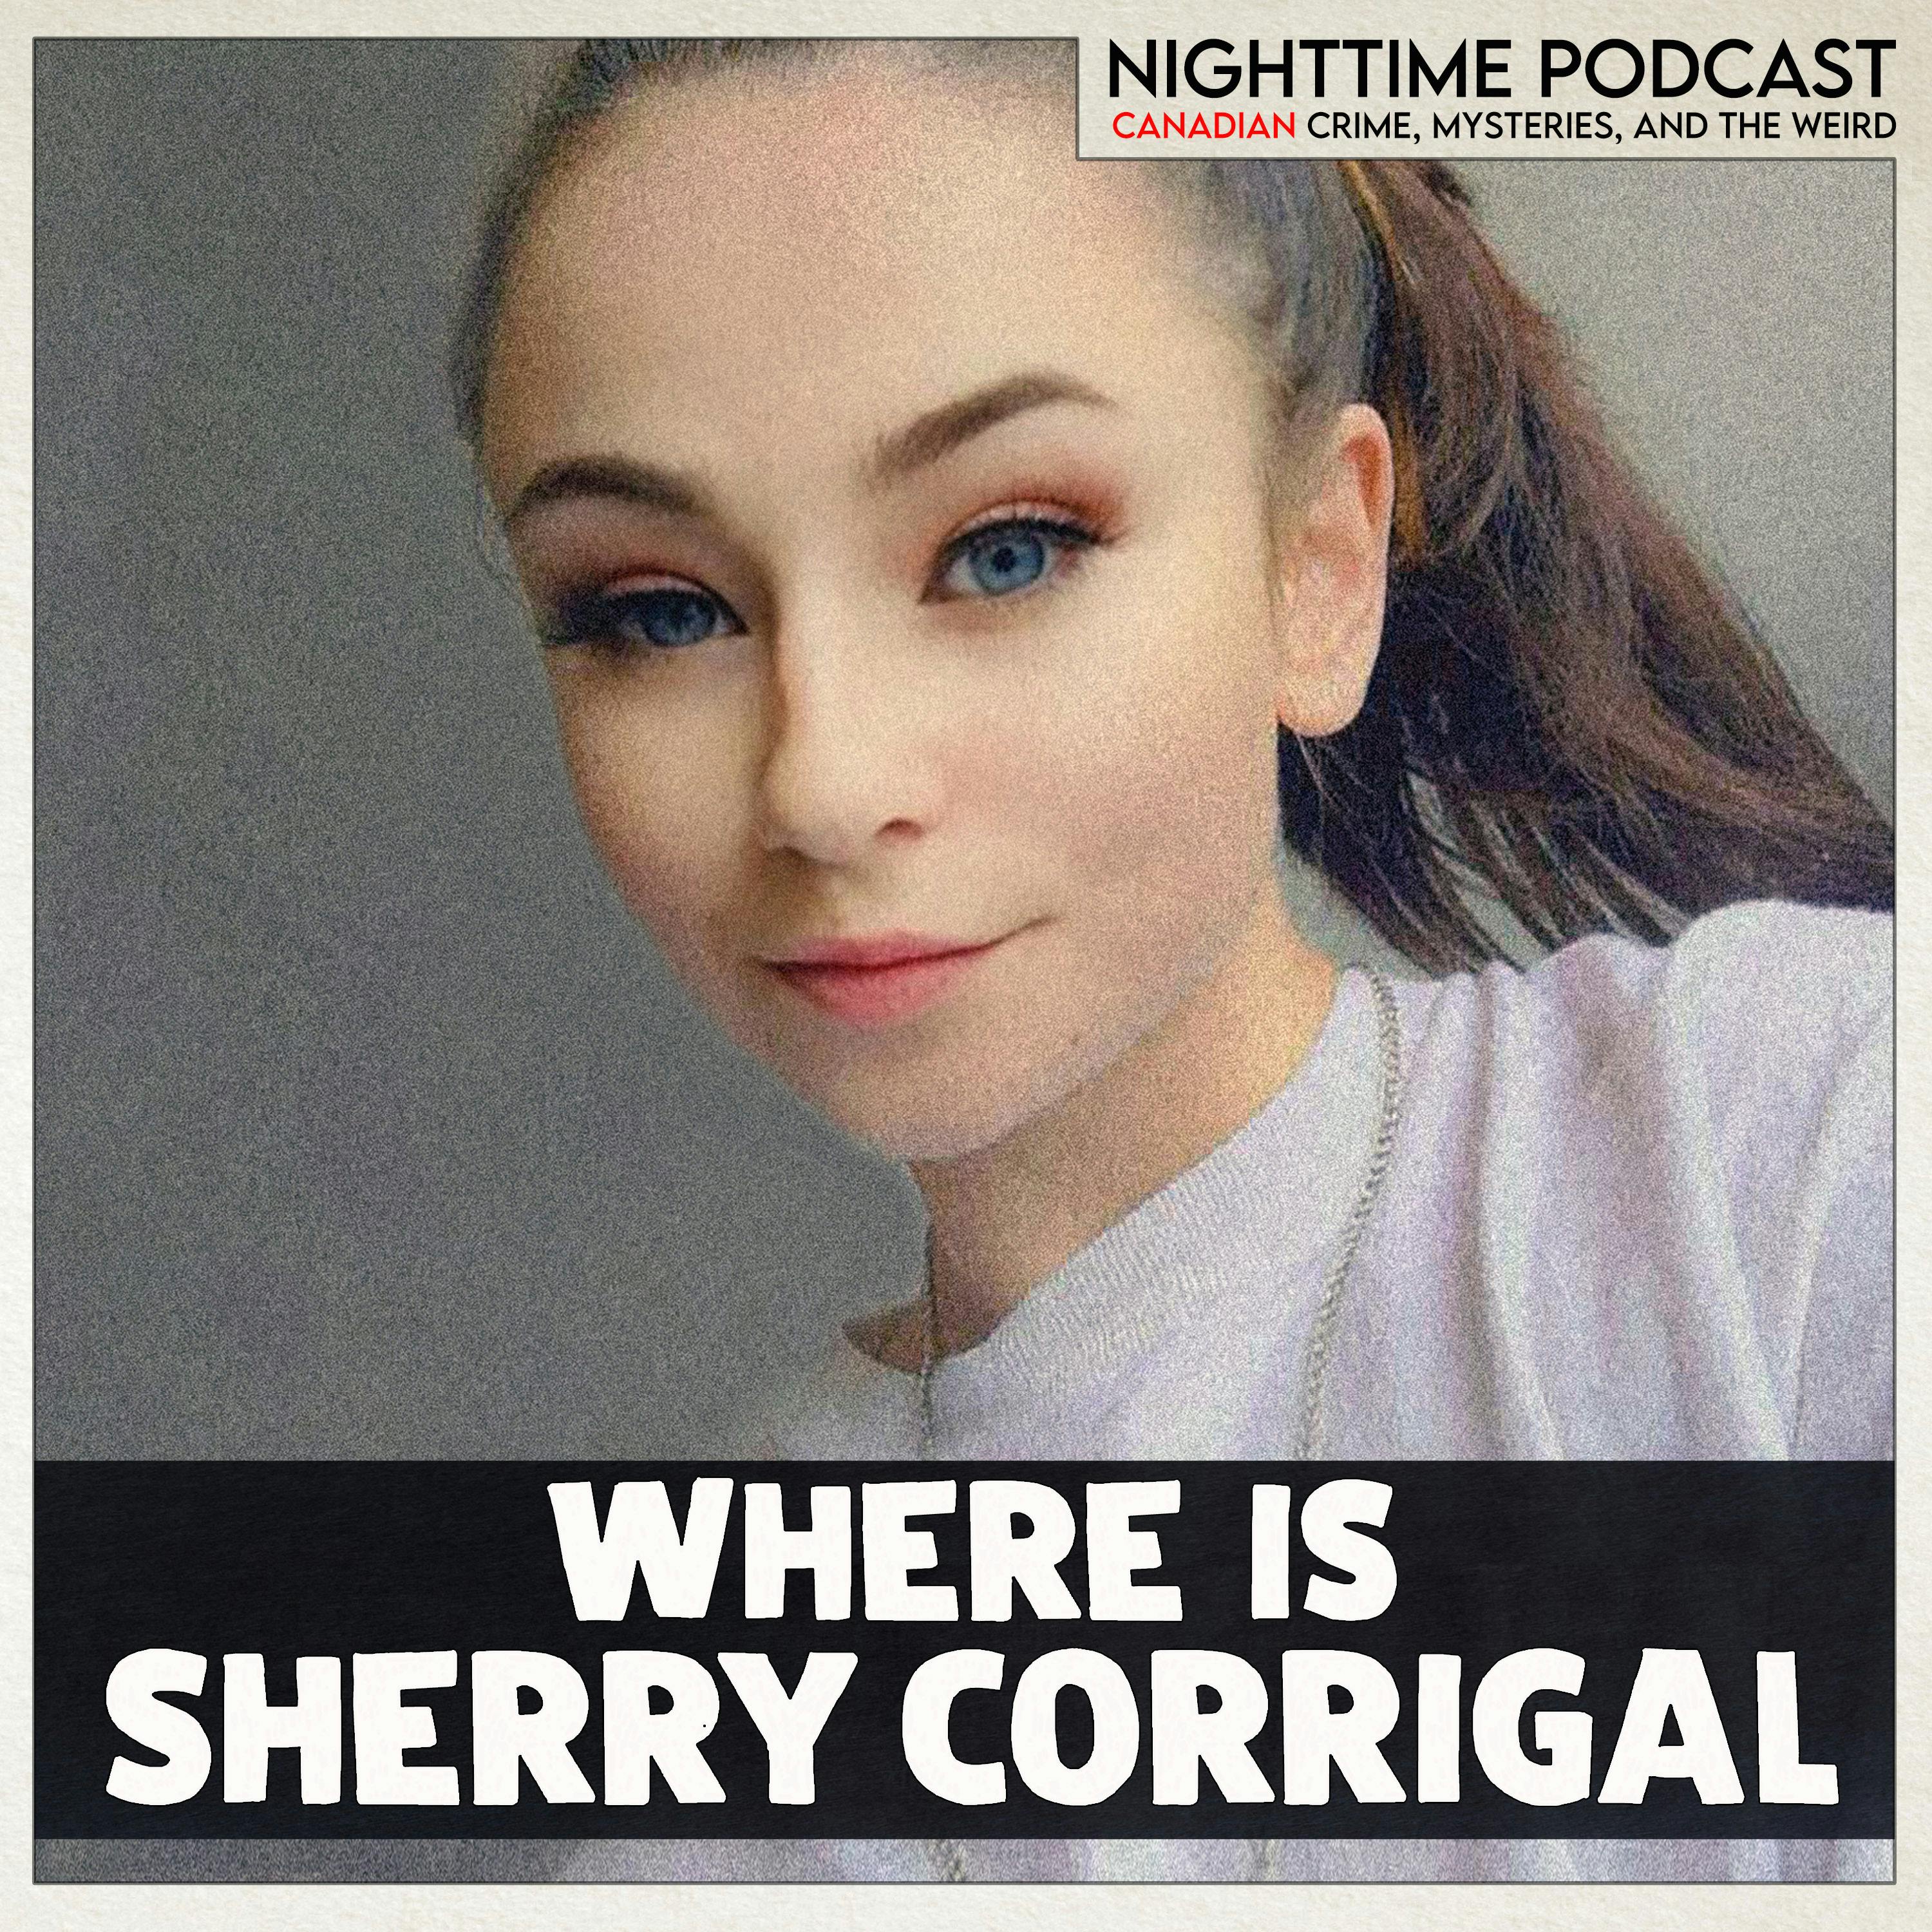 Where is Sherry Corrigal